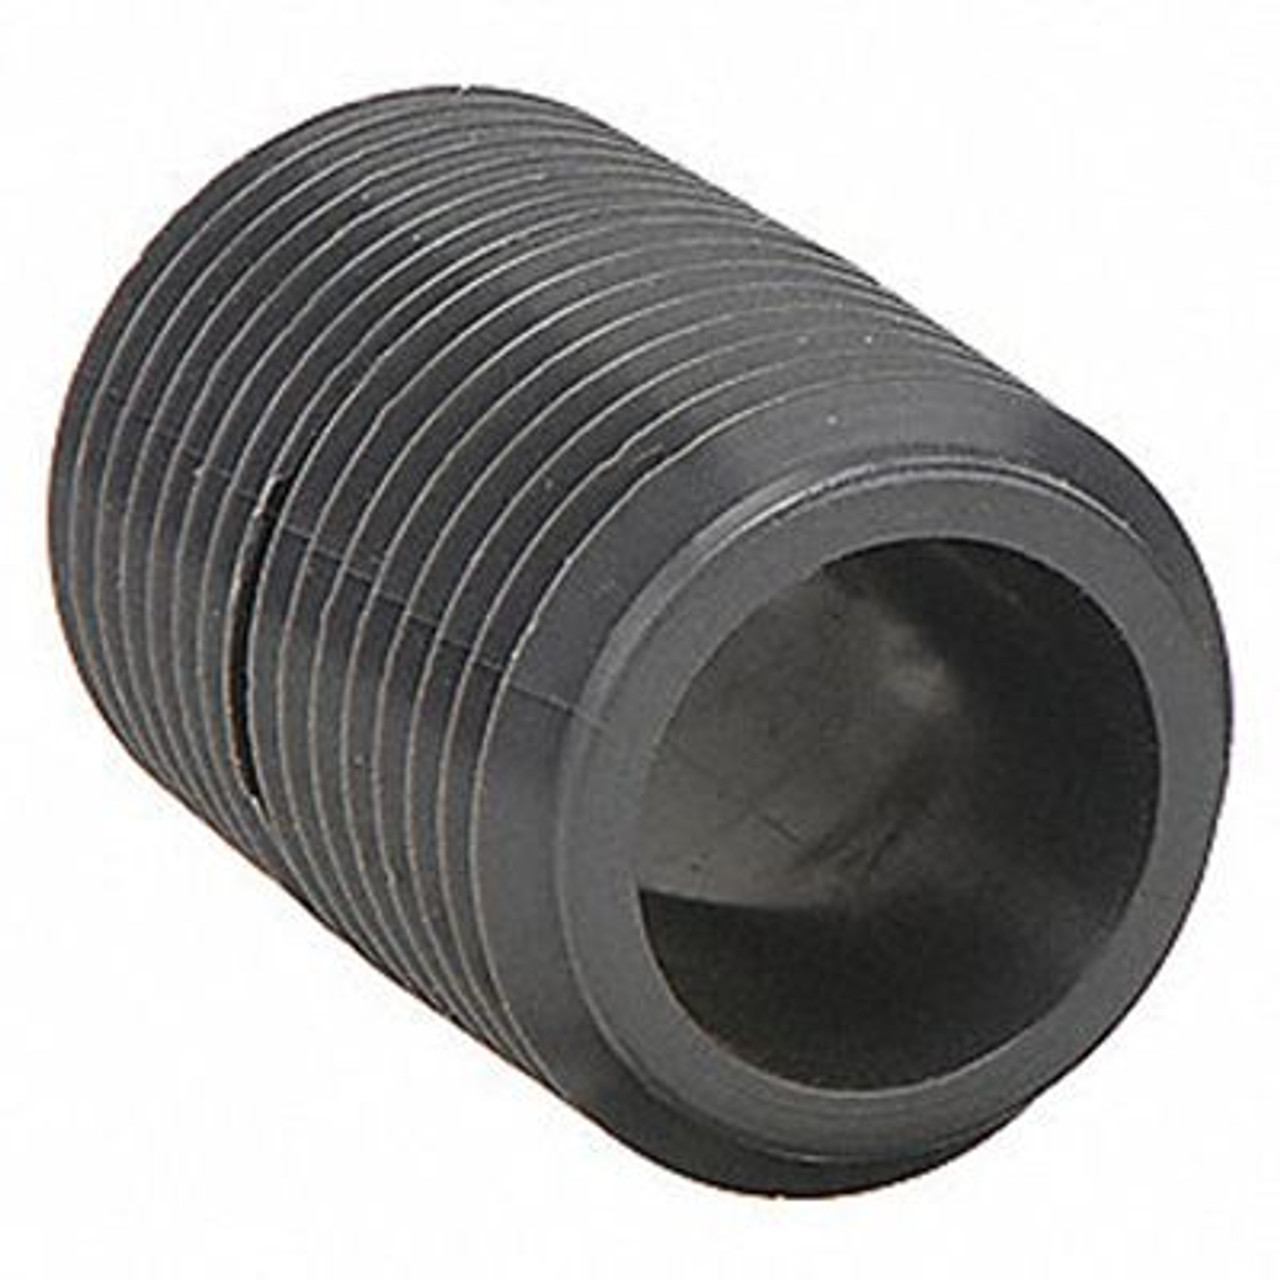 +GF+ 1-1/2 by 2 inch nipple, male pipe thread connection